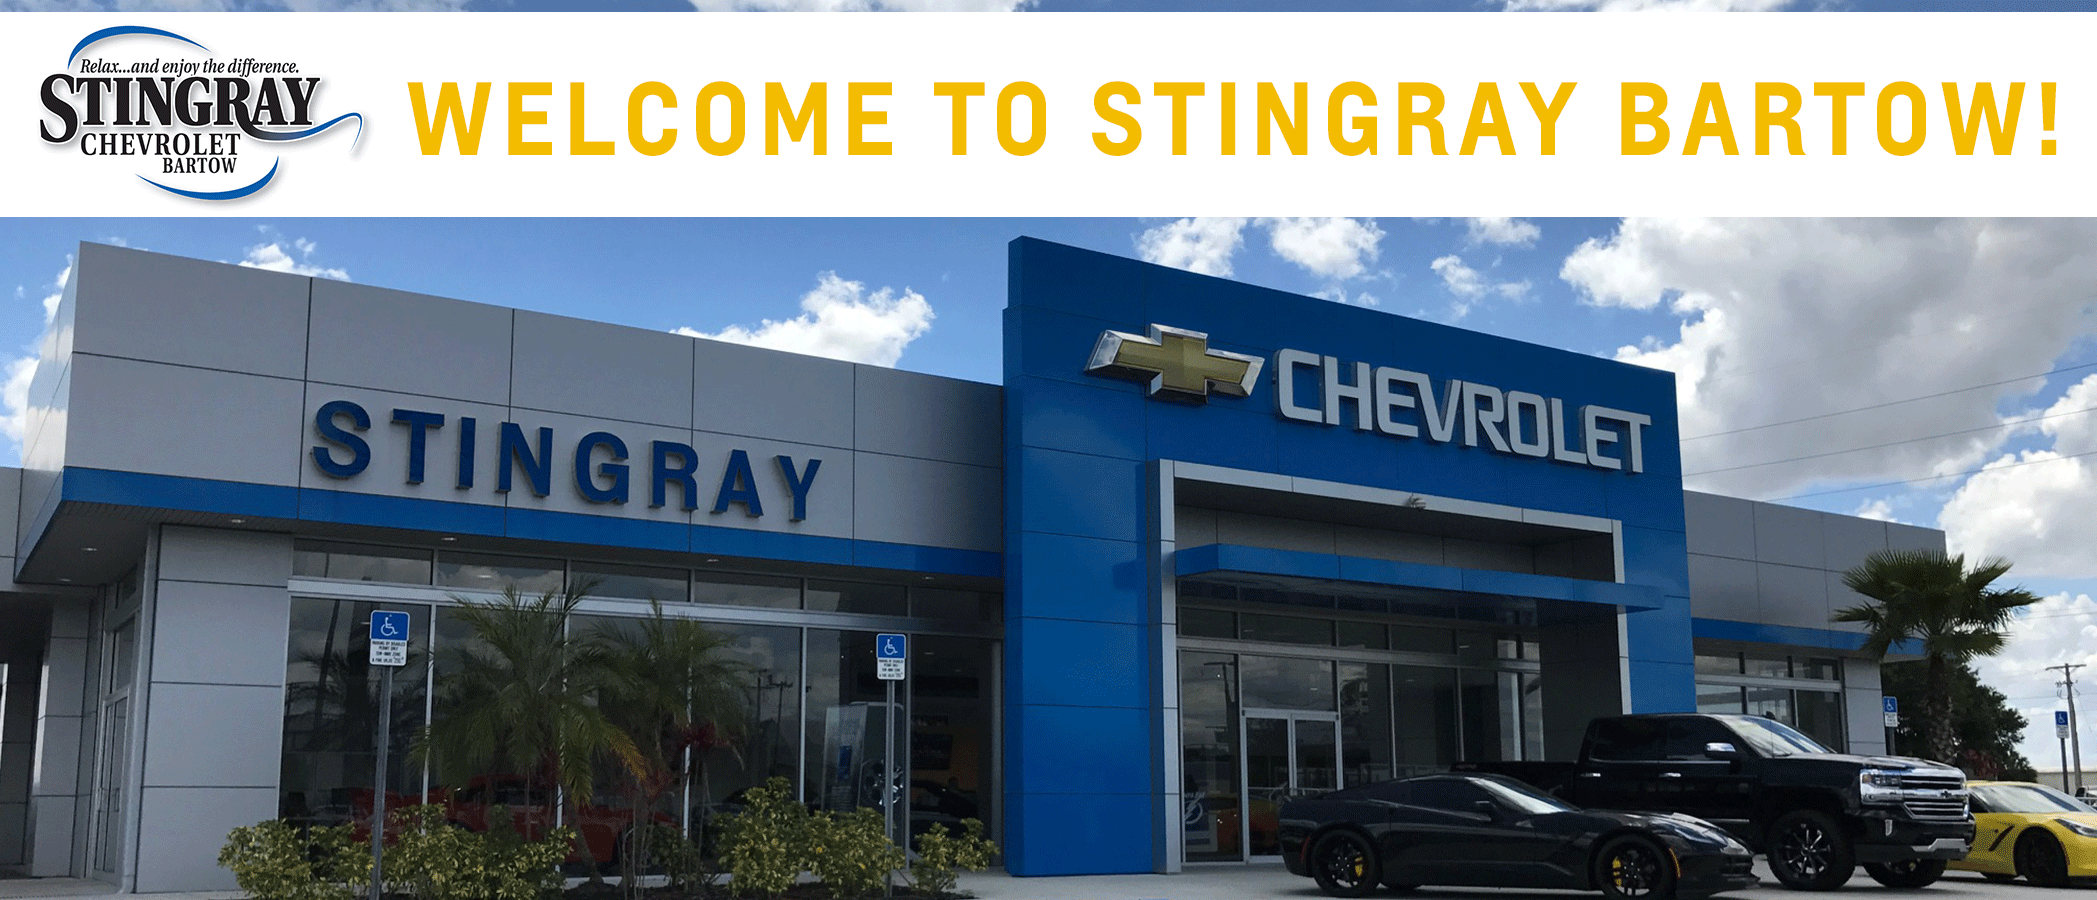 Welcome to Stingray Bartow!